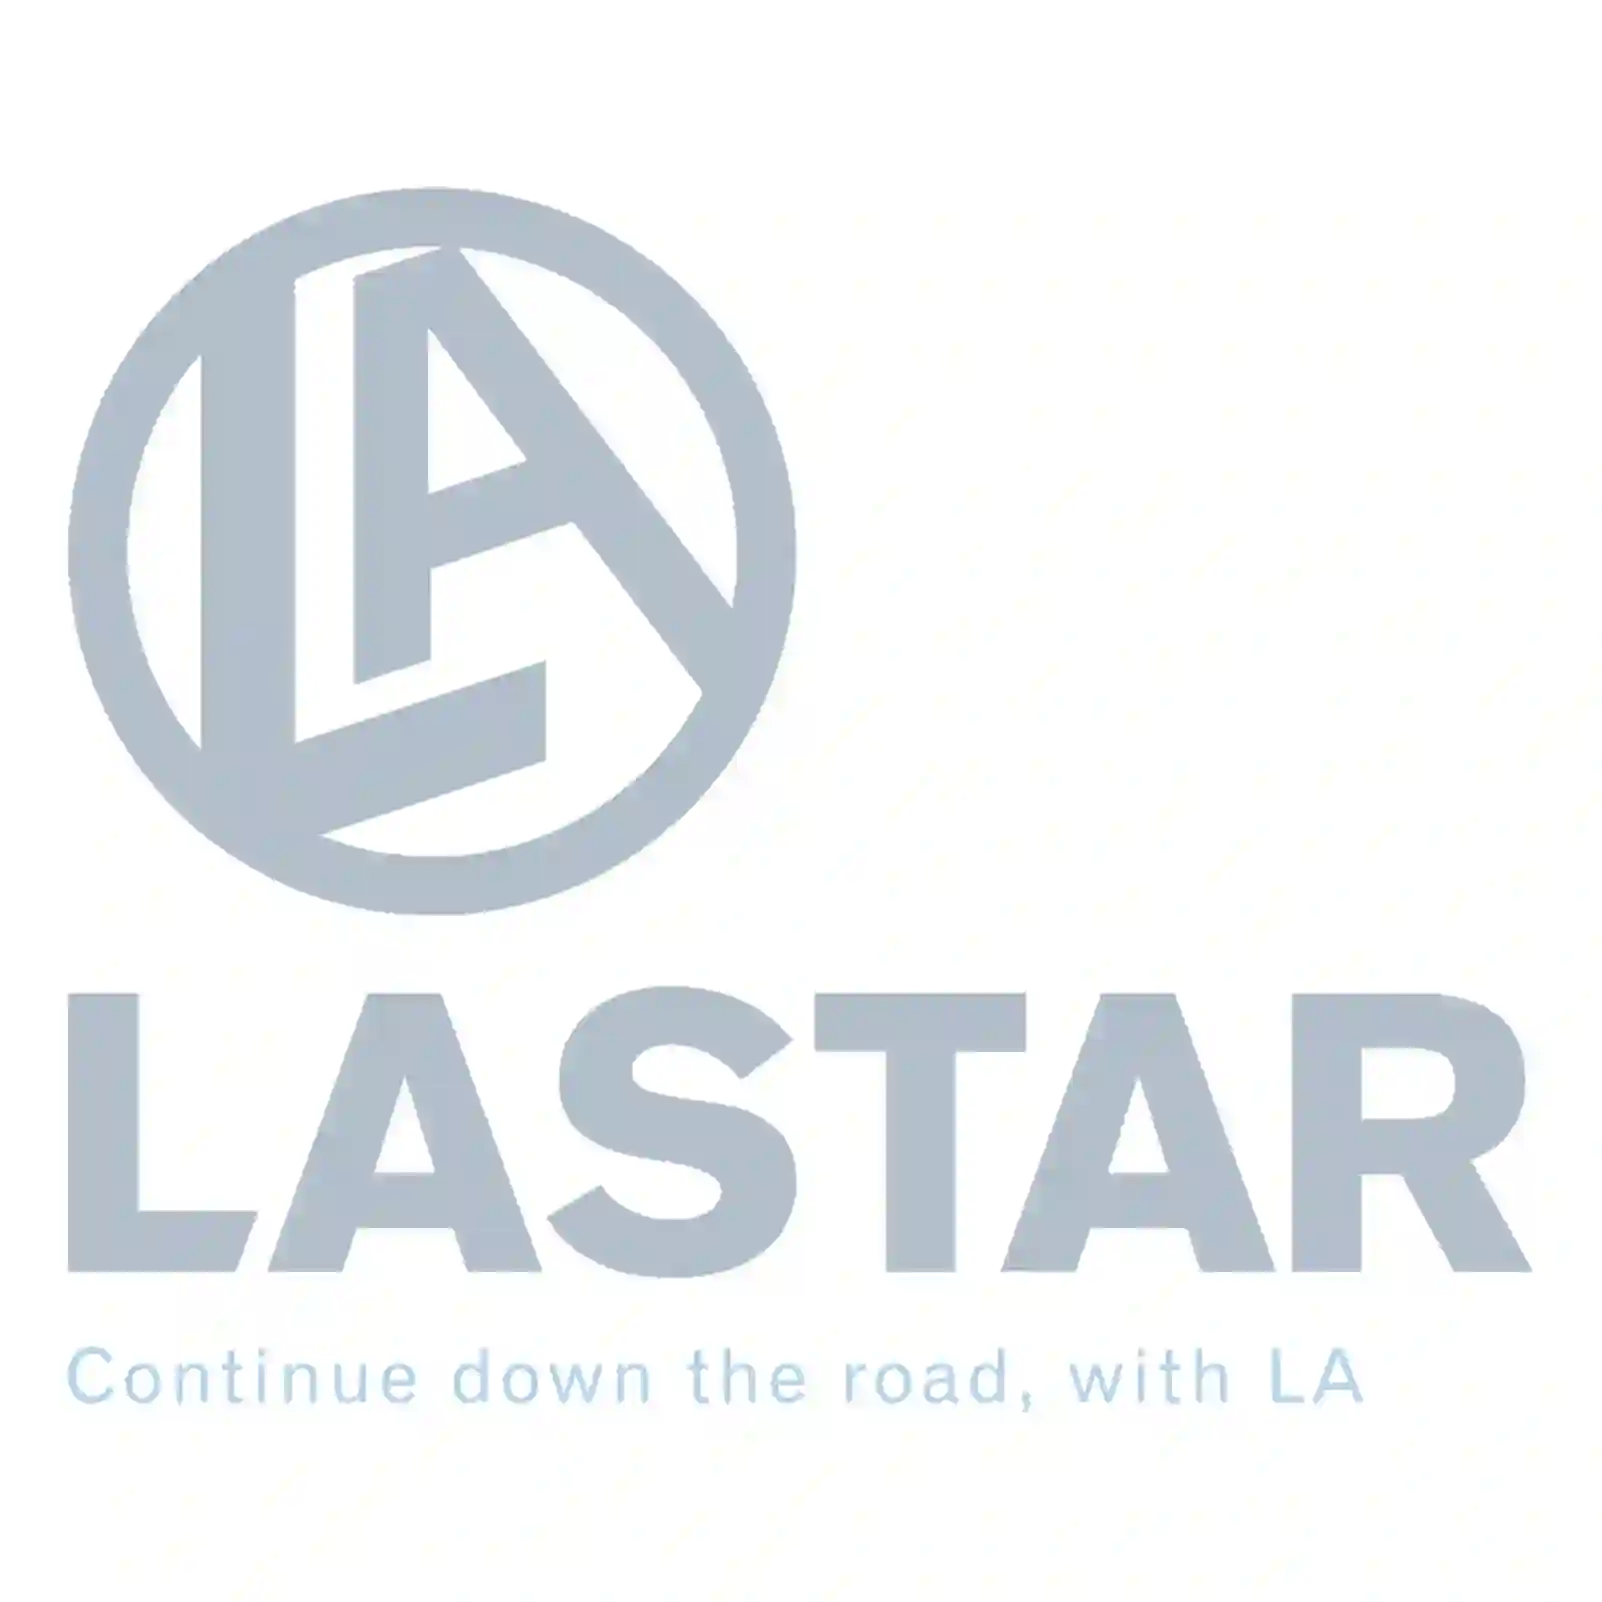  Spring brake cylinder, without bracket || Lastar Spare Part | Truck Spare Parts, Auotomotive Spare Parts